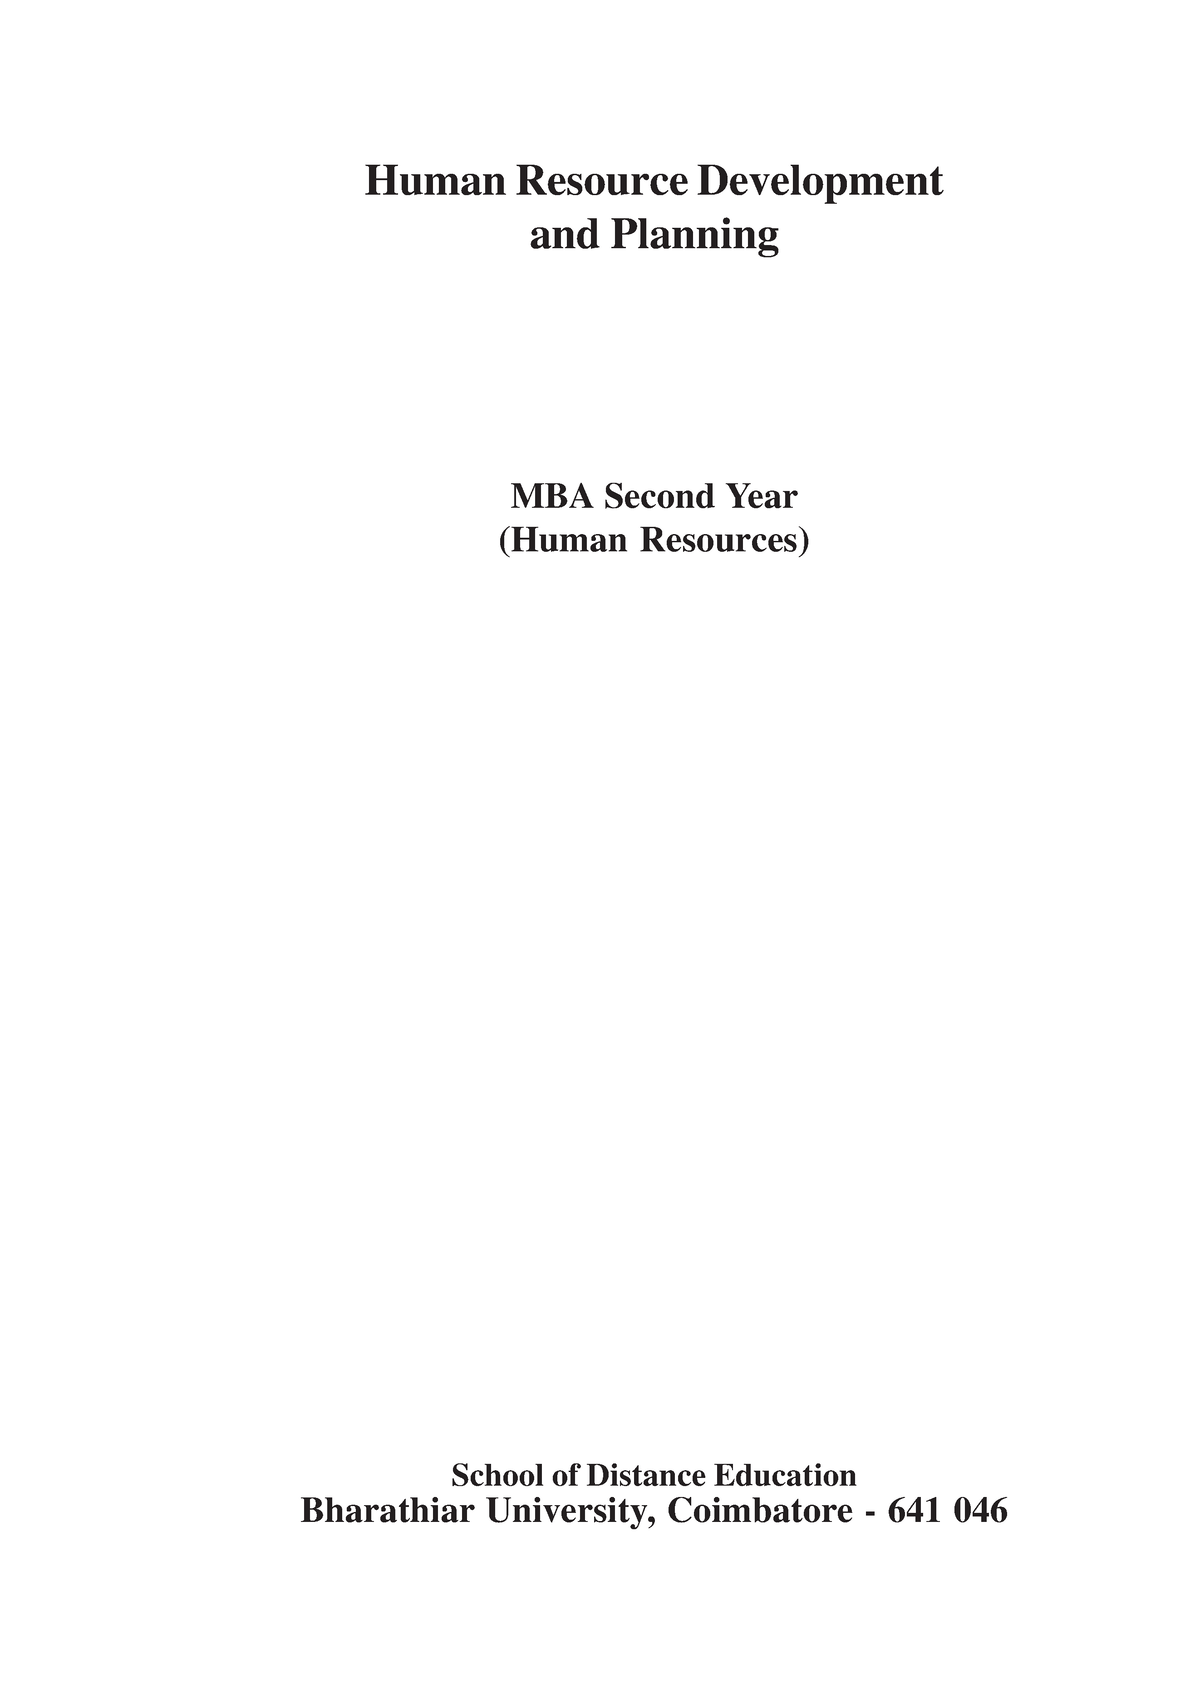 thesis topics for mba human resource management